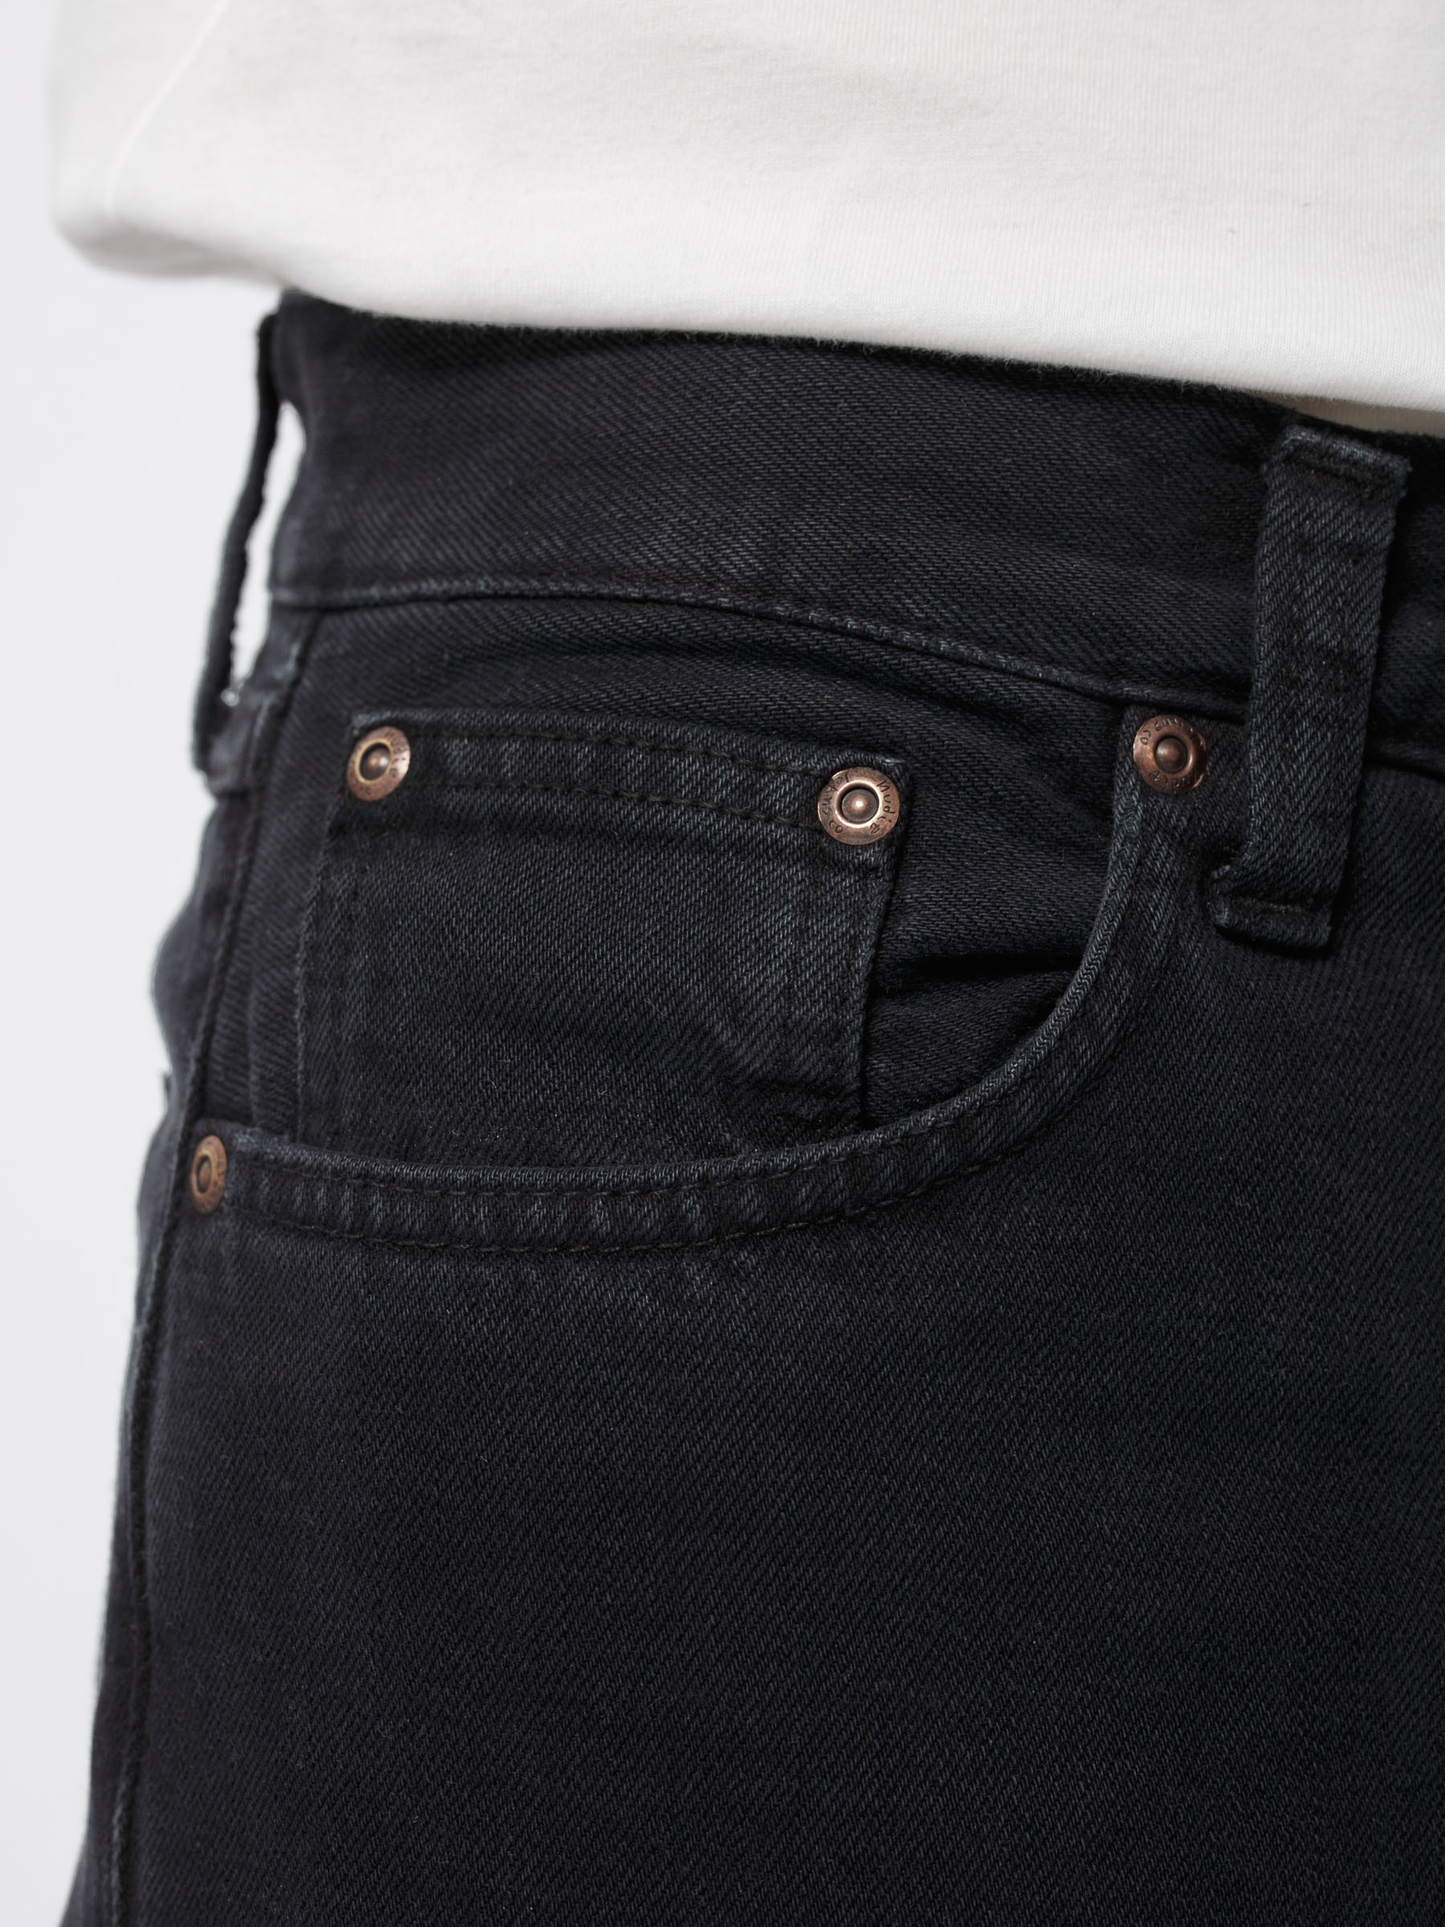 Nudie Jeans Gritty Jackson Jean L30 Black Forest